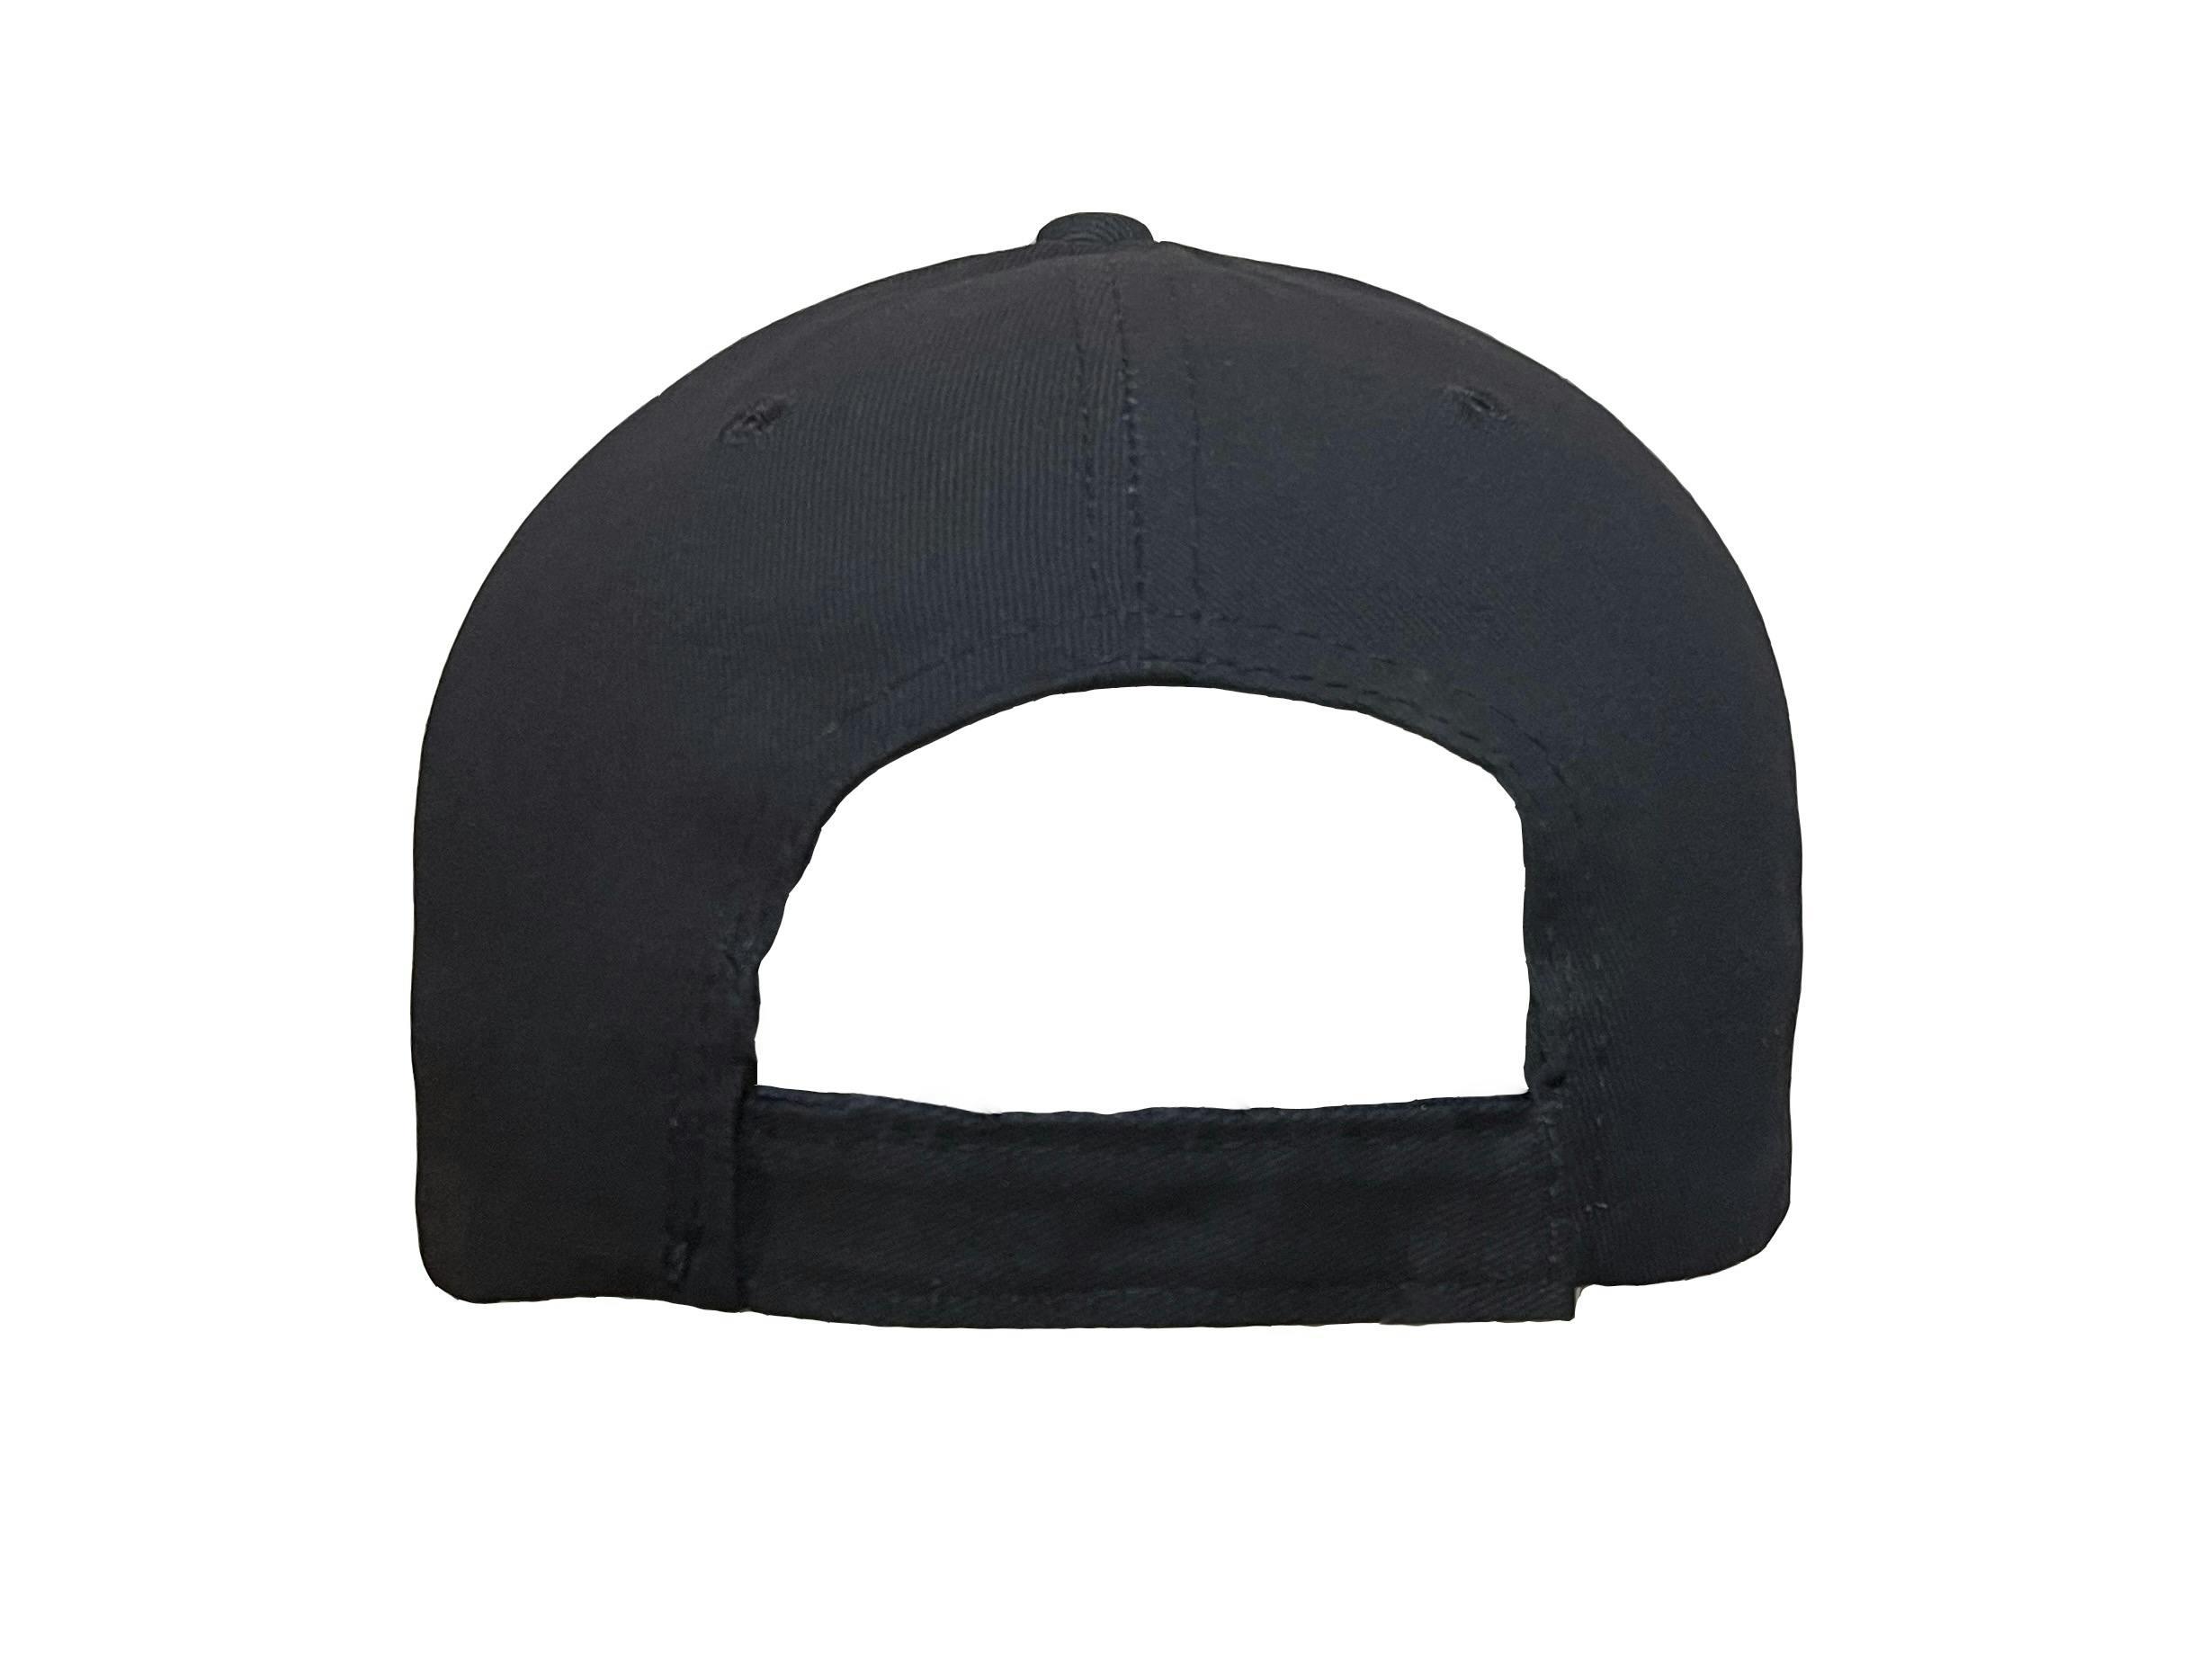 6 PANEL POLY/COTTON CAP WITH VELCRO CLOSURE